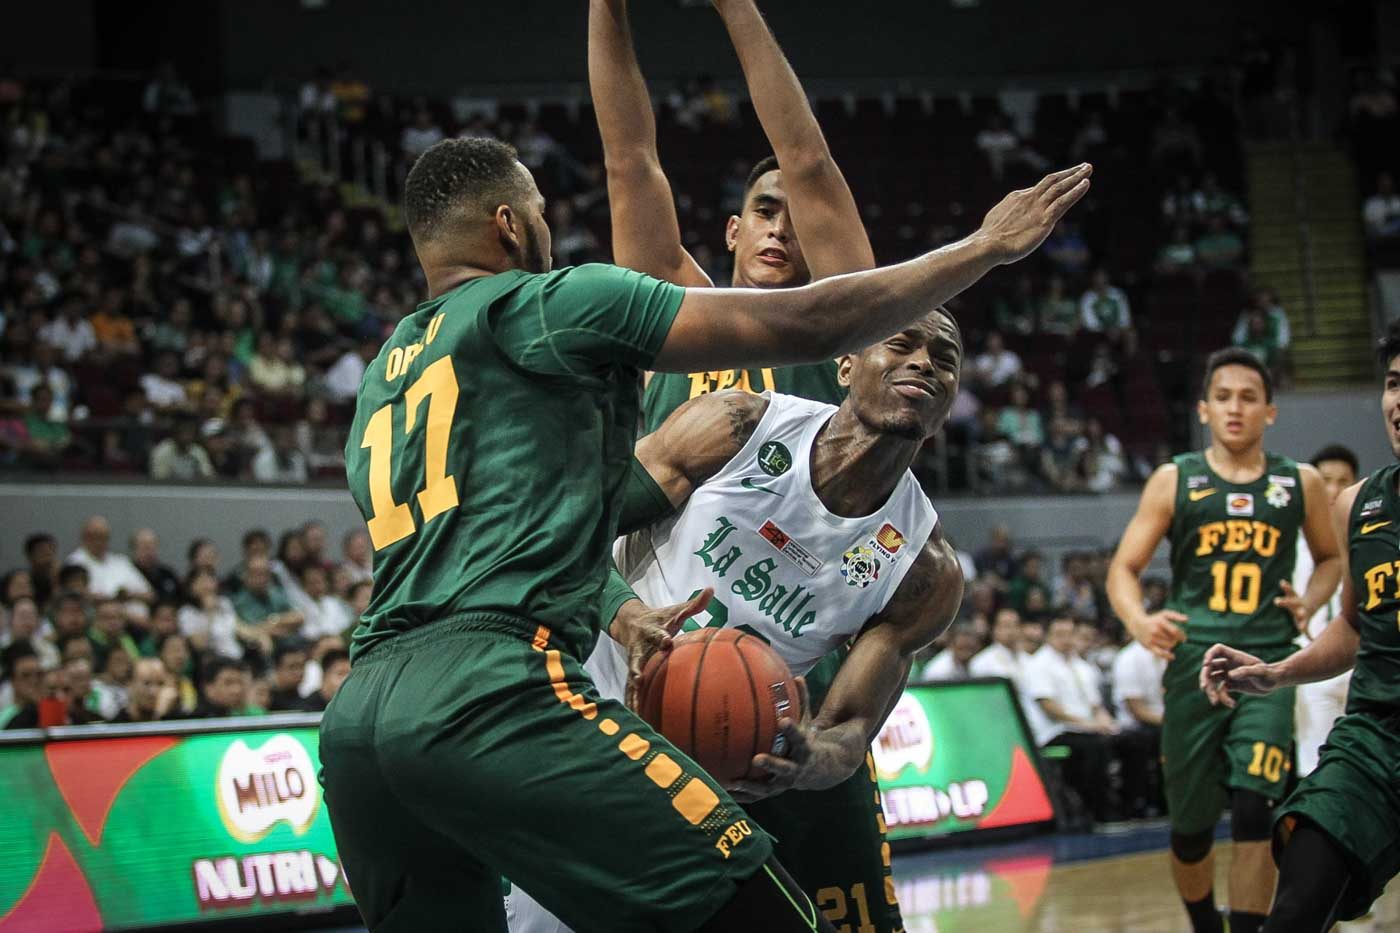 La Salle’s Mbala to UAAP refs: ‘at least call the obvious fouls’